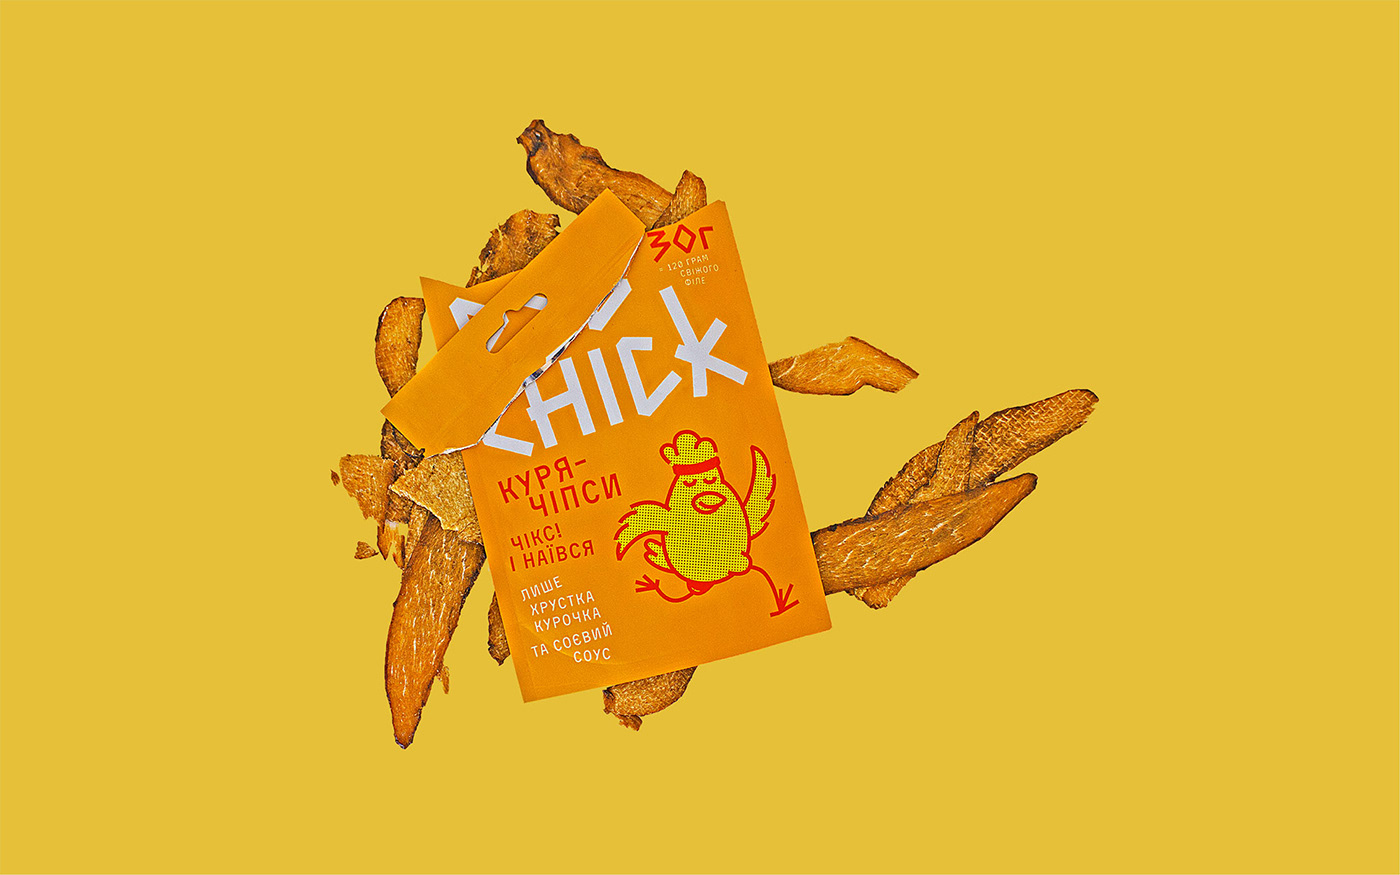 Character chicken chill digital doypack Packaging posters snacks Stories yellow